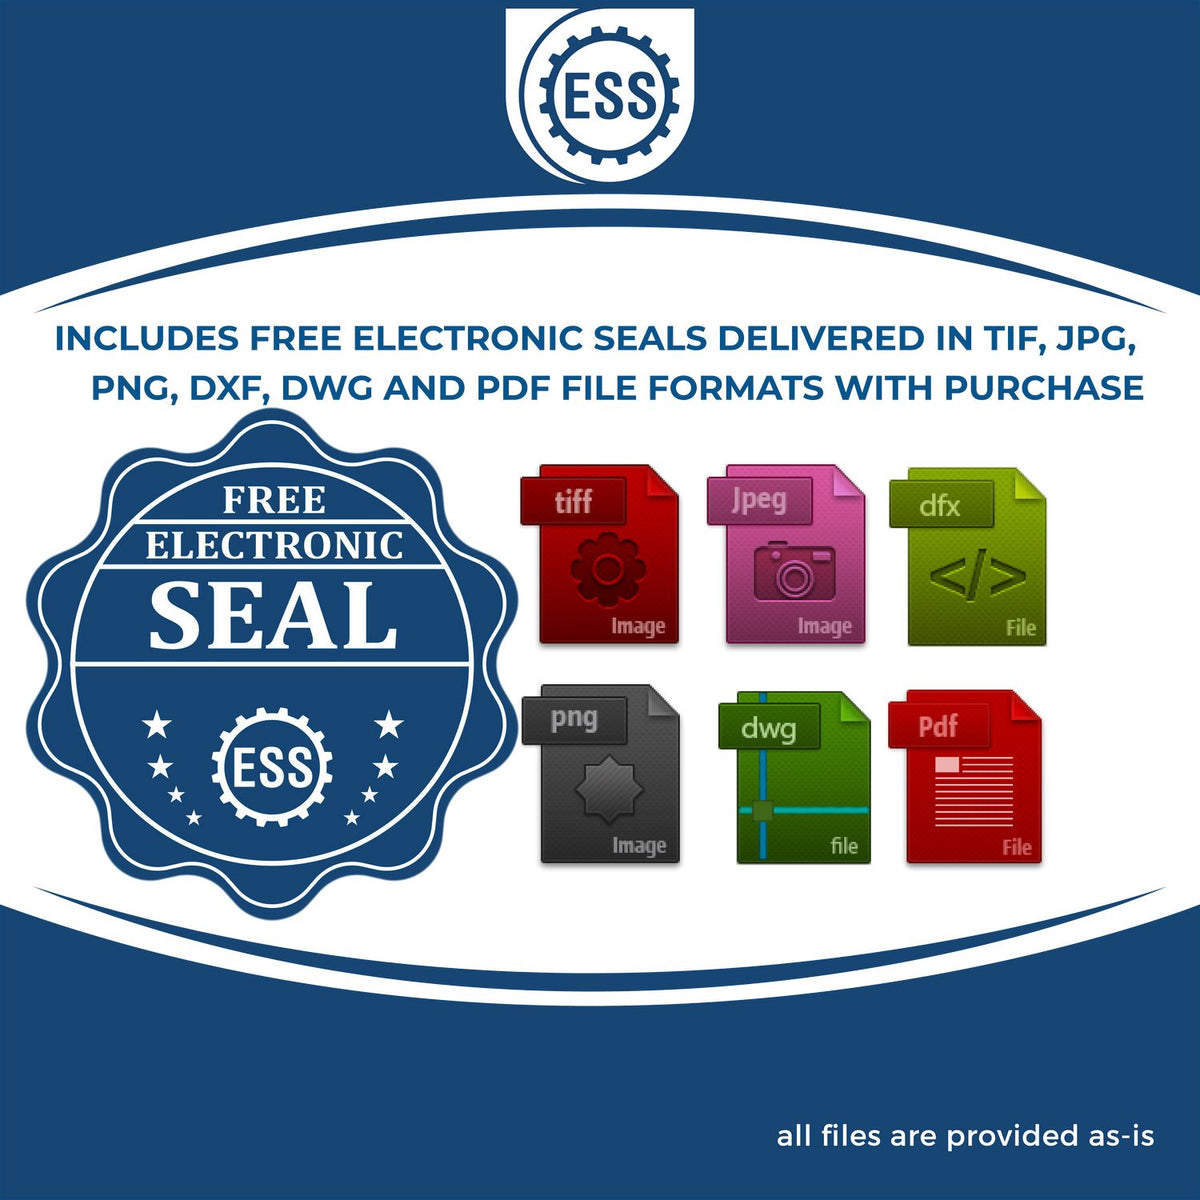 An infographic for the free electronic seal for the Slim Pre-Inked Nevada Land Surveyor Seal Stamp illustrating the different file type icons such as DXF, DWG, TIF, JPG and PNG.